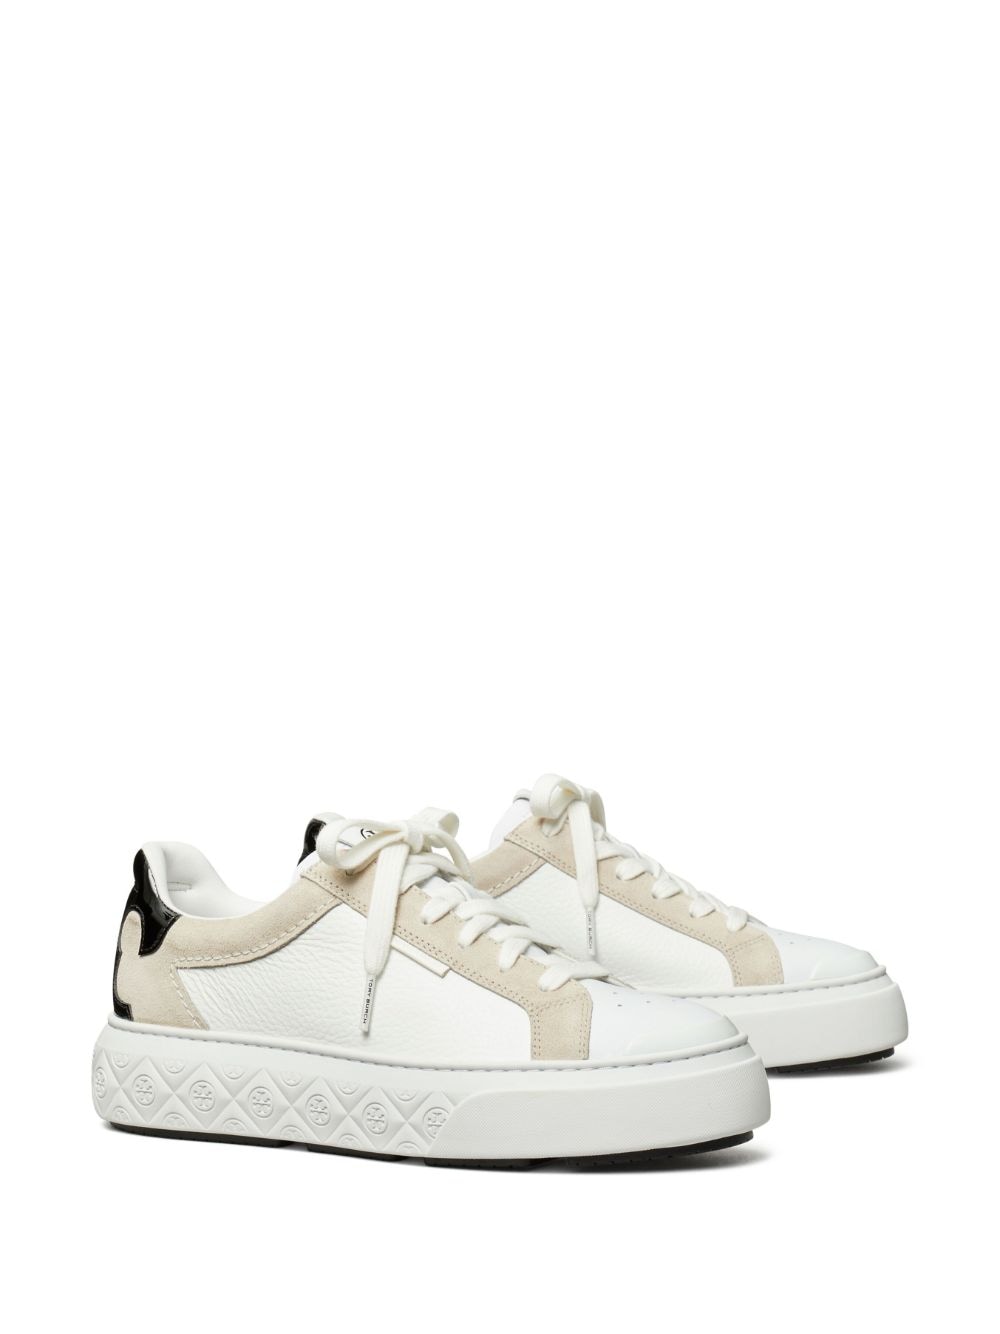 Shop Tory Burch Ladybug Panelled Sneakers In Neutrals